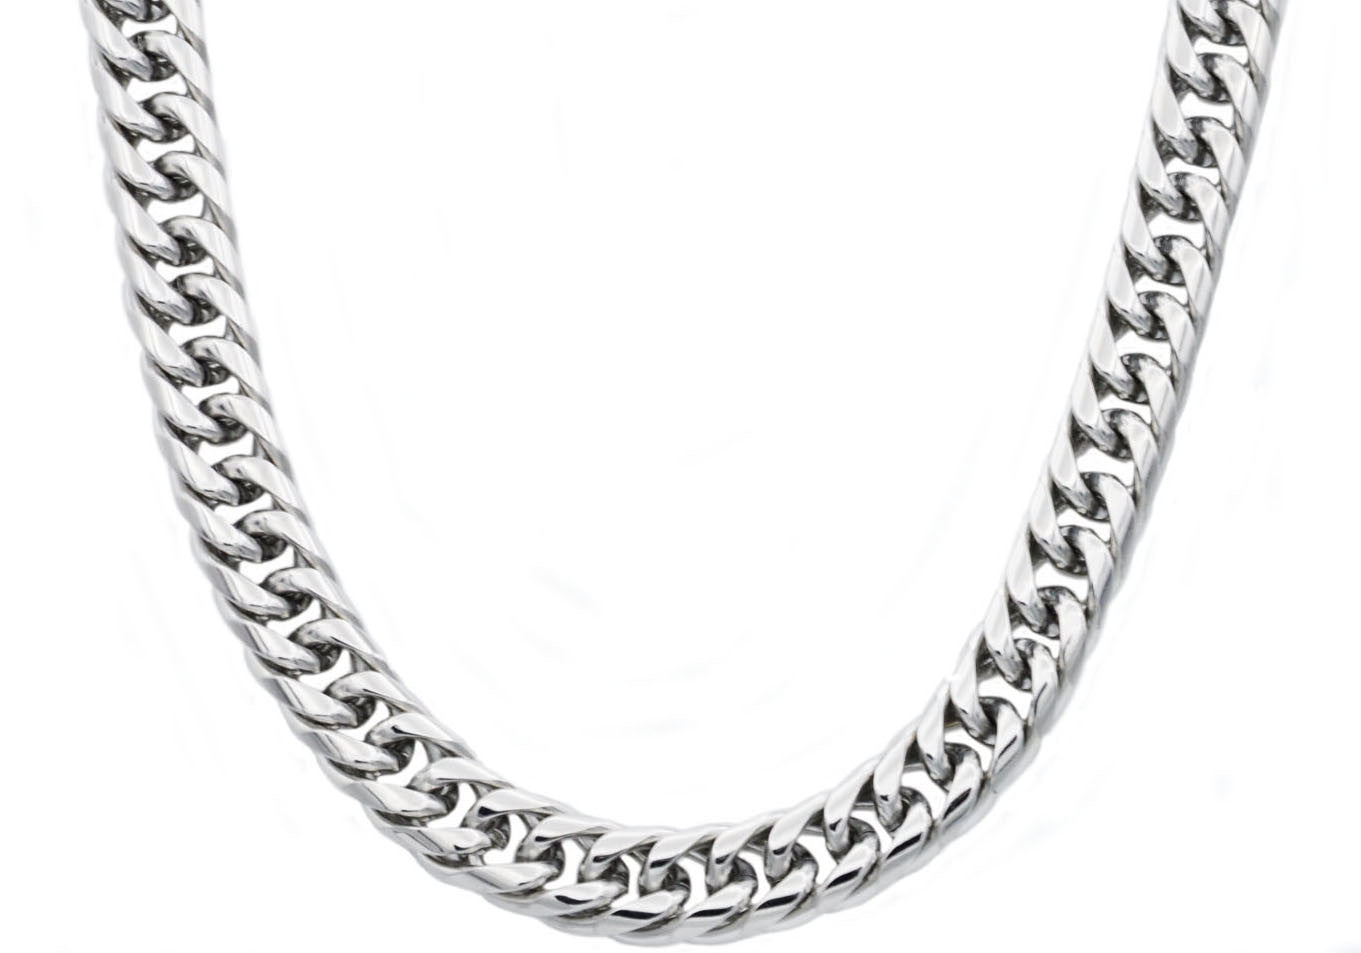 Double Link Chain Link Necklace